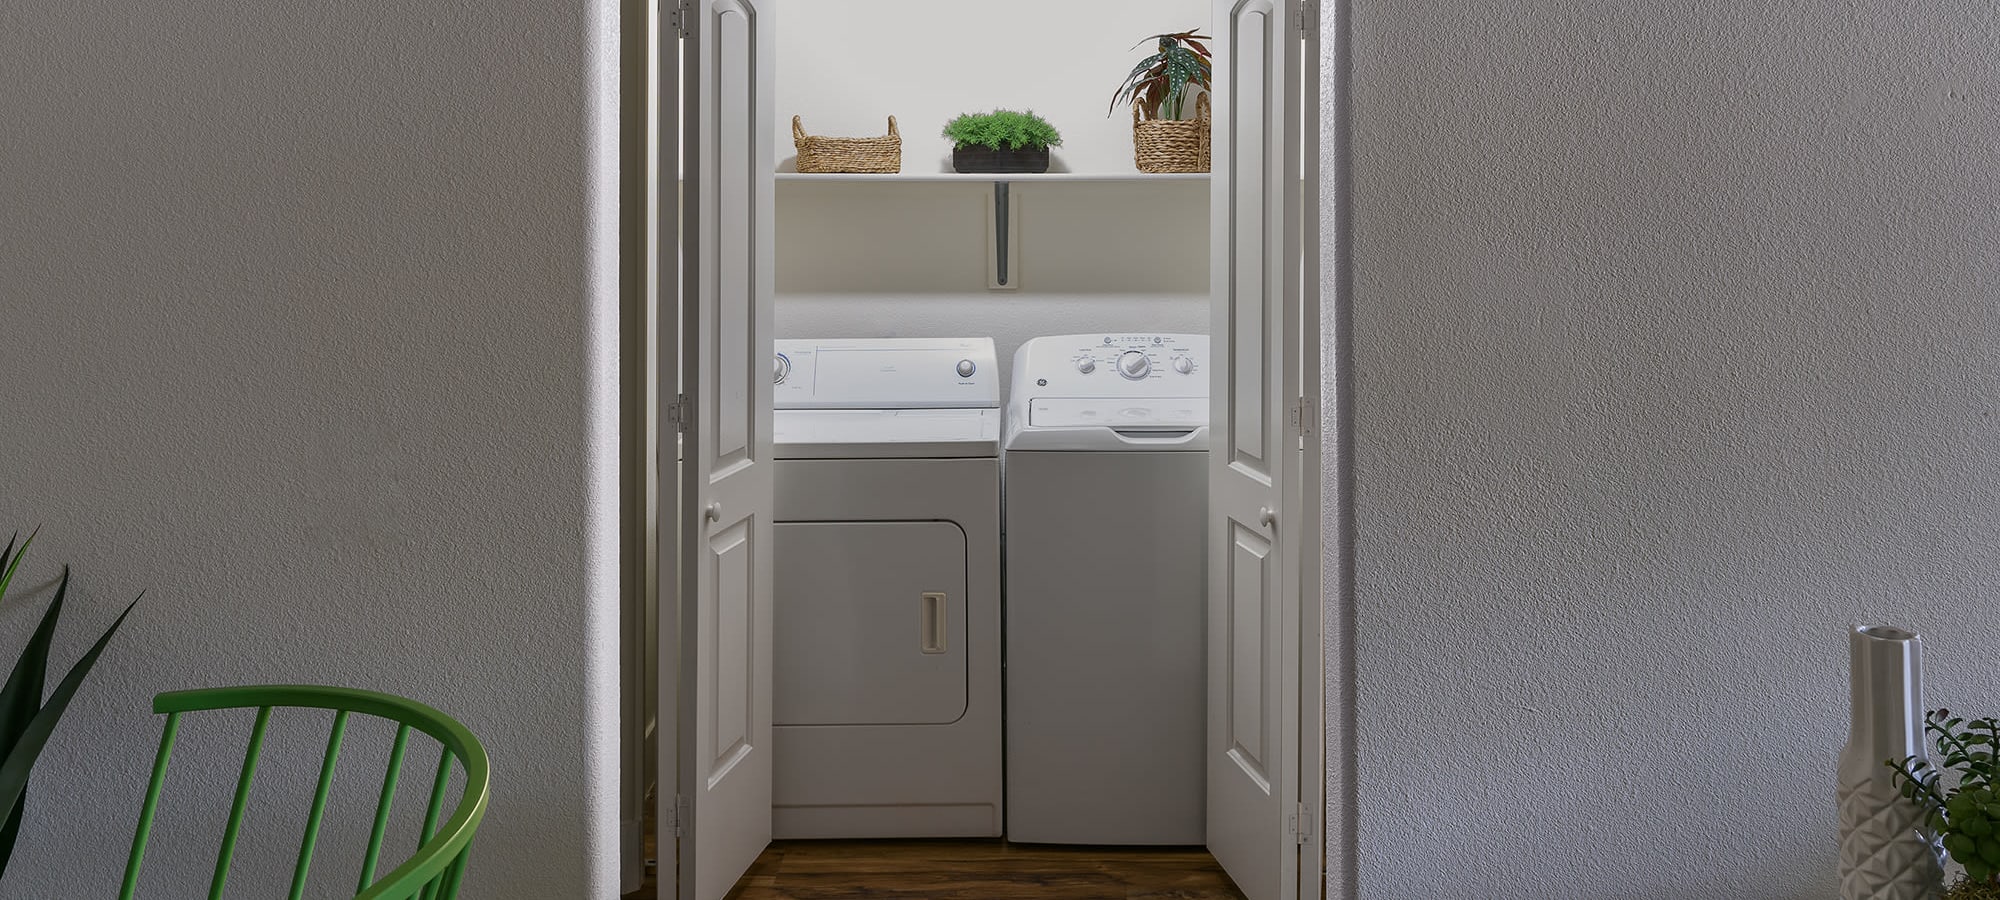 In-unit washer and dryer at Stone Oaks in Chandler, Arizona